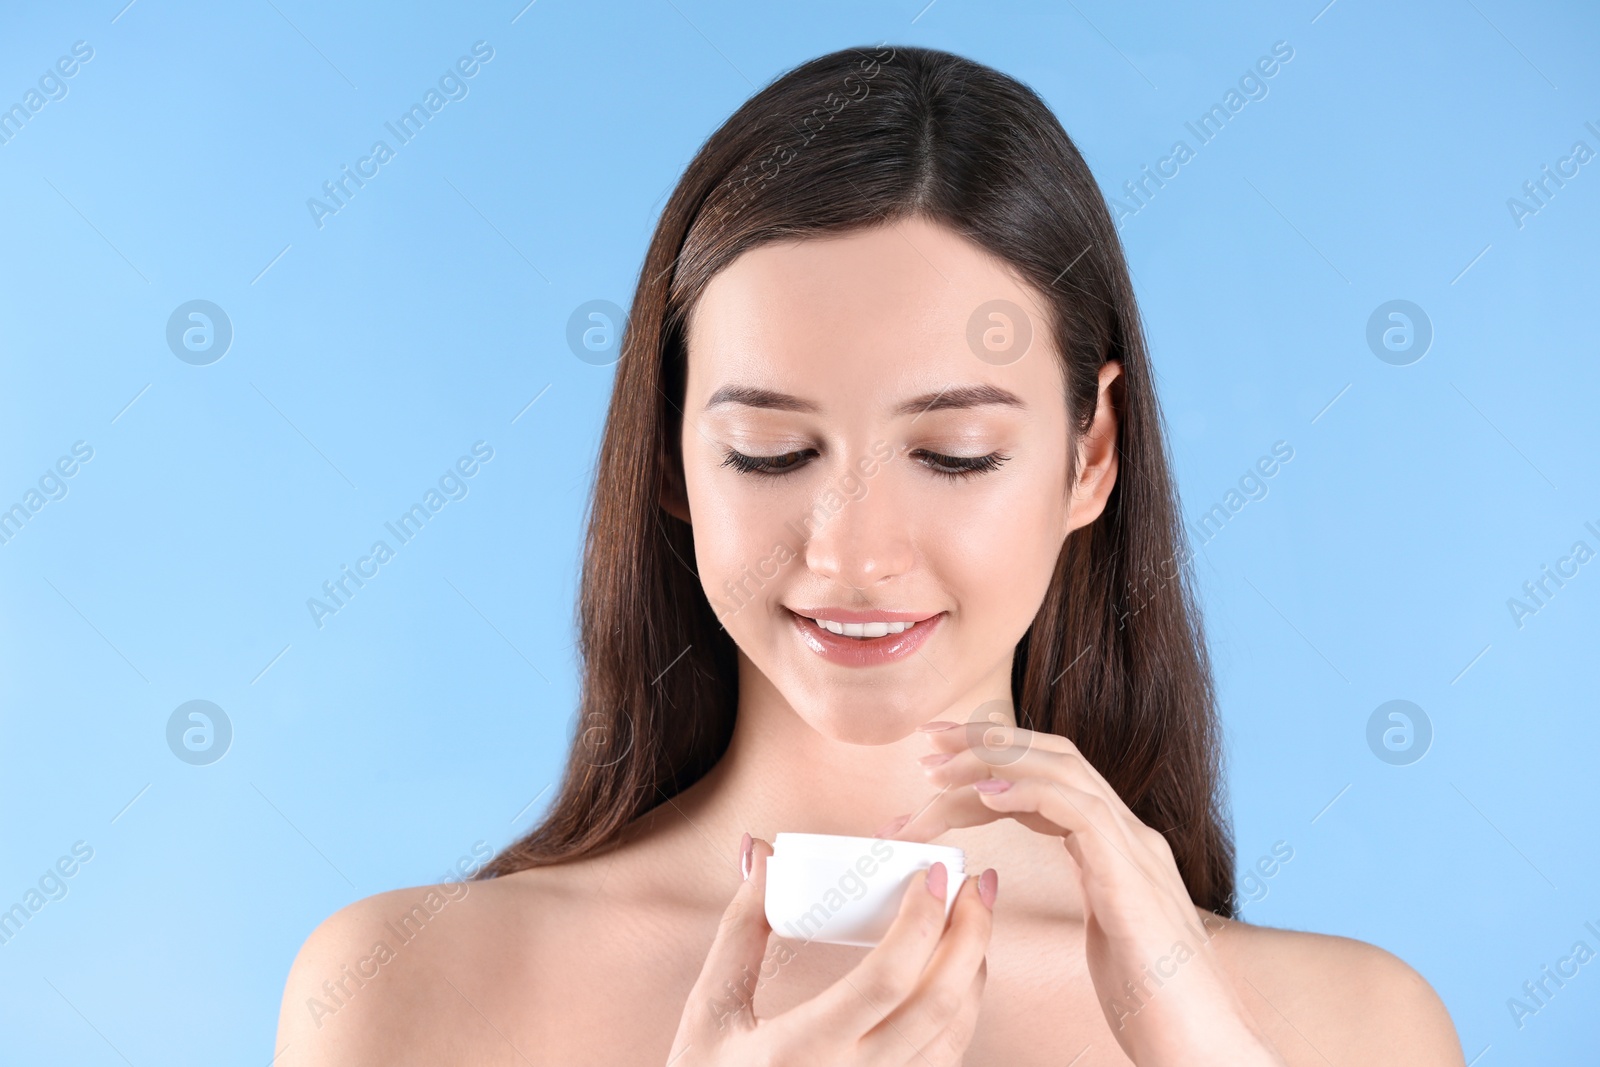 Photo of Teenage girl with acne problem using cream against color background